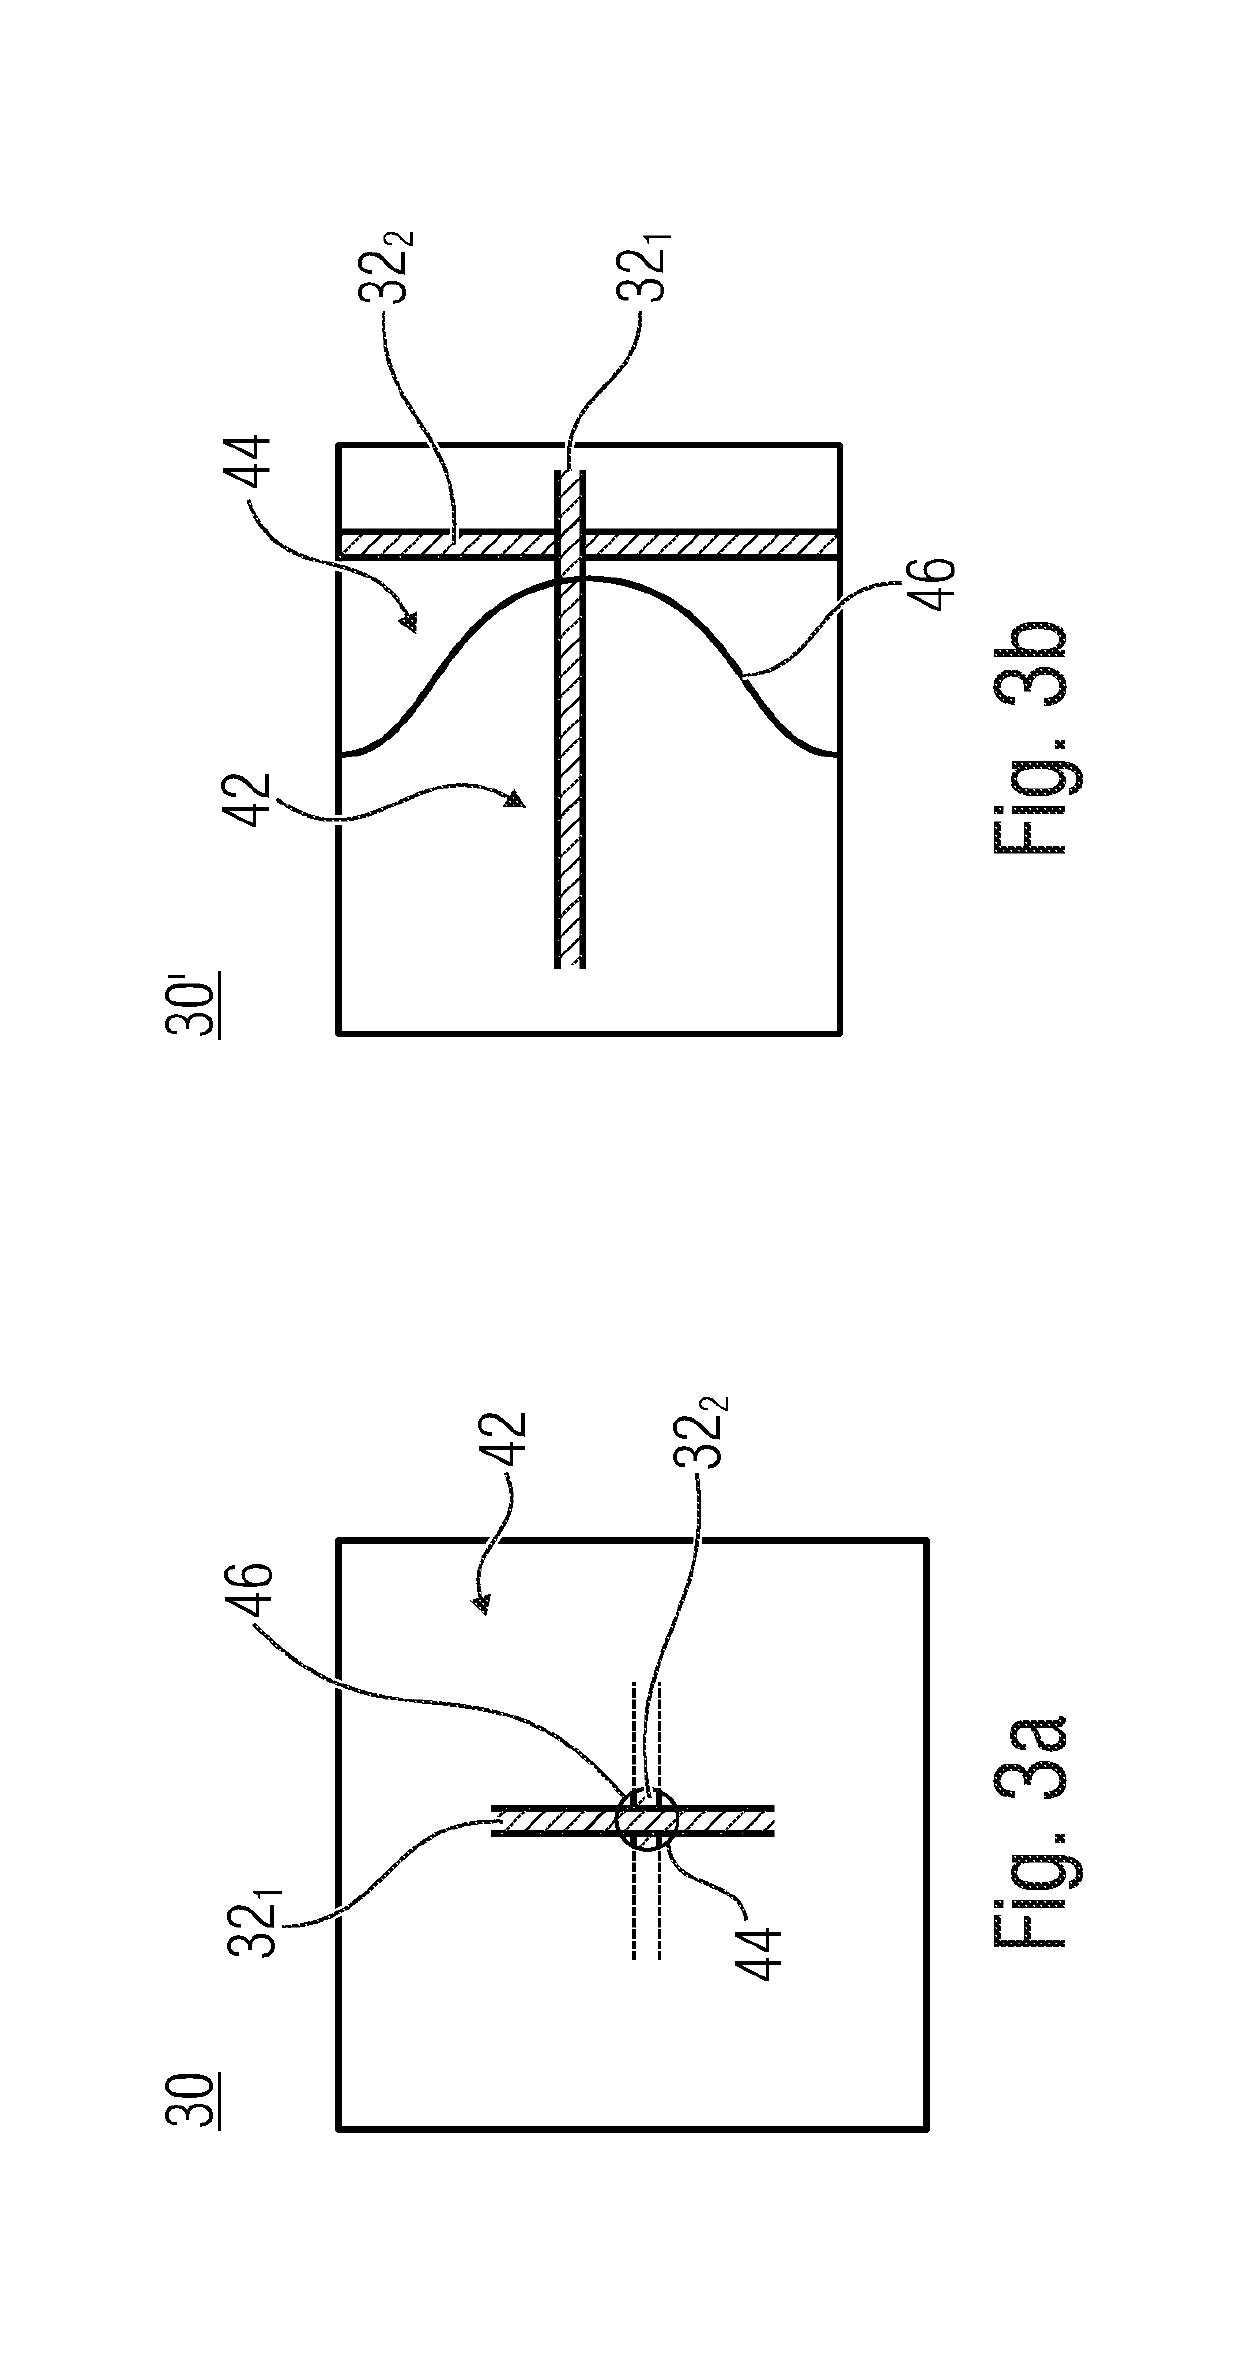 PUF-Film and Method for Producing the Same